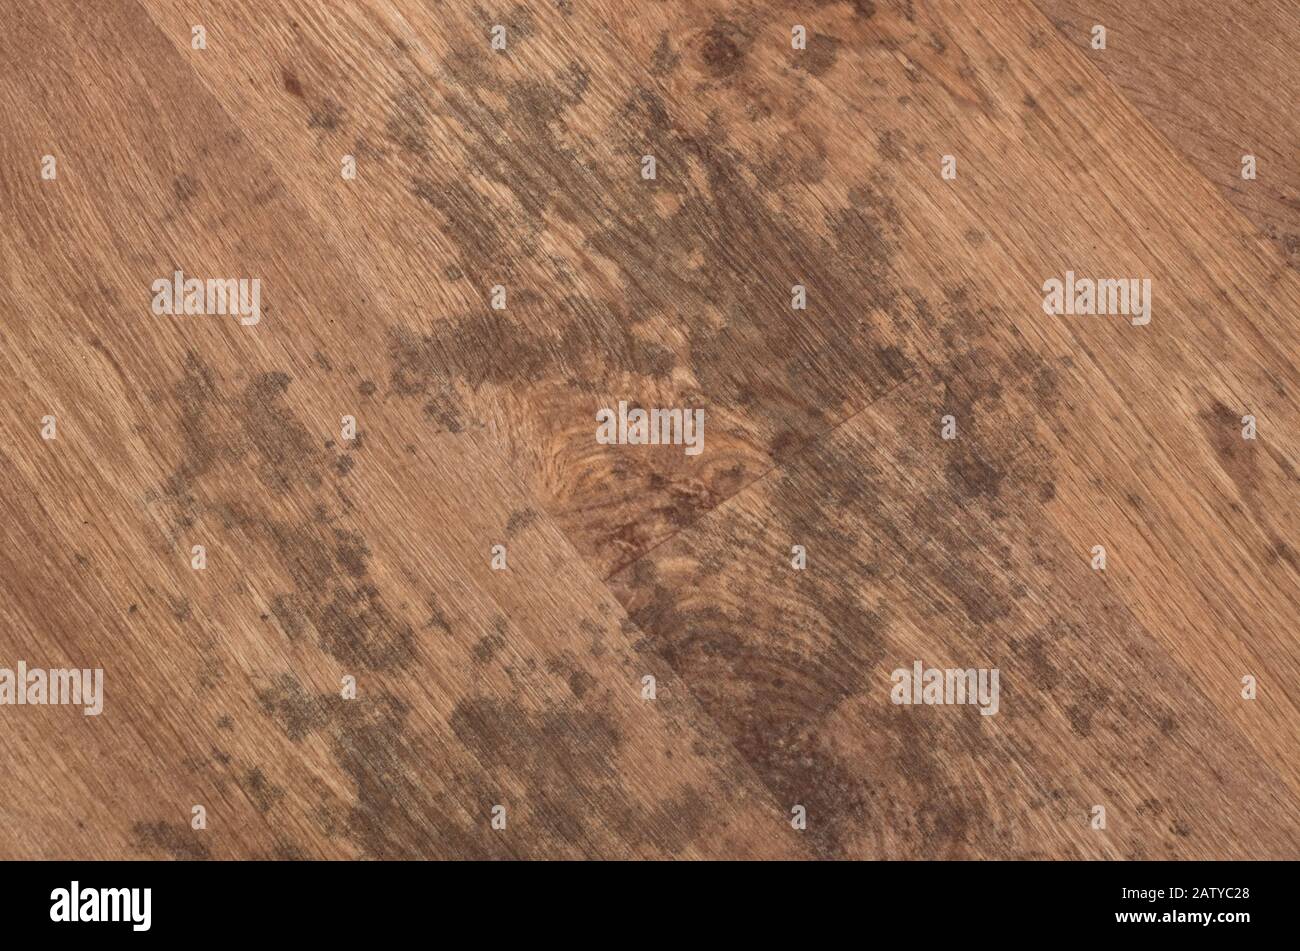 Damp Patches On a Textured Beech Wood Effect Vinyl Floor Stock Photo